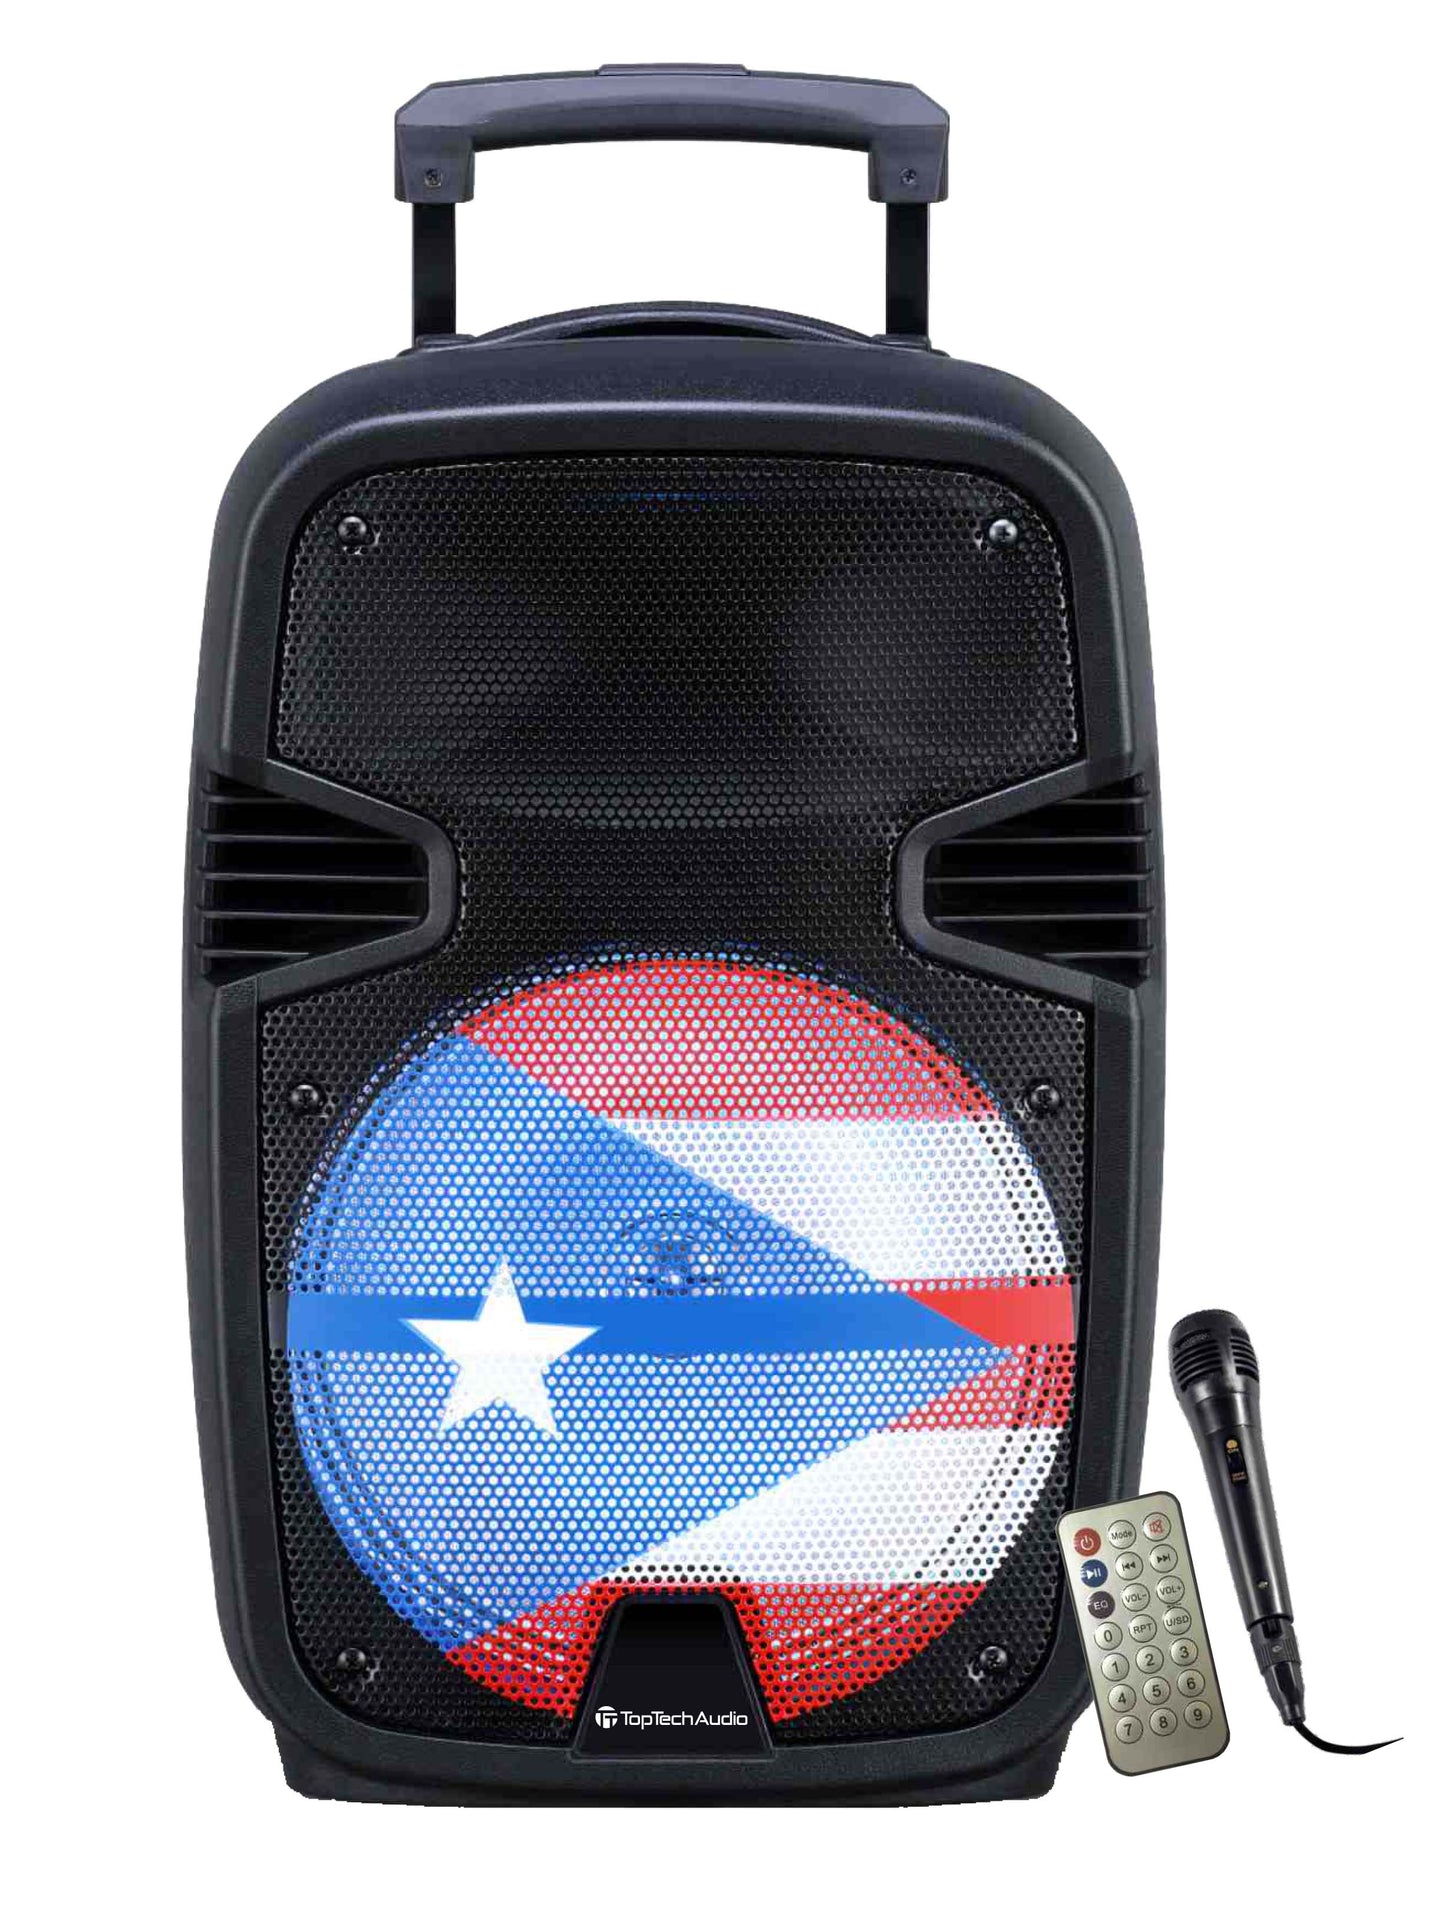 Fully Amplified Portable 4500 Watts Peak Power 12” Speaker with led light